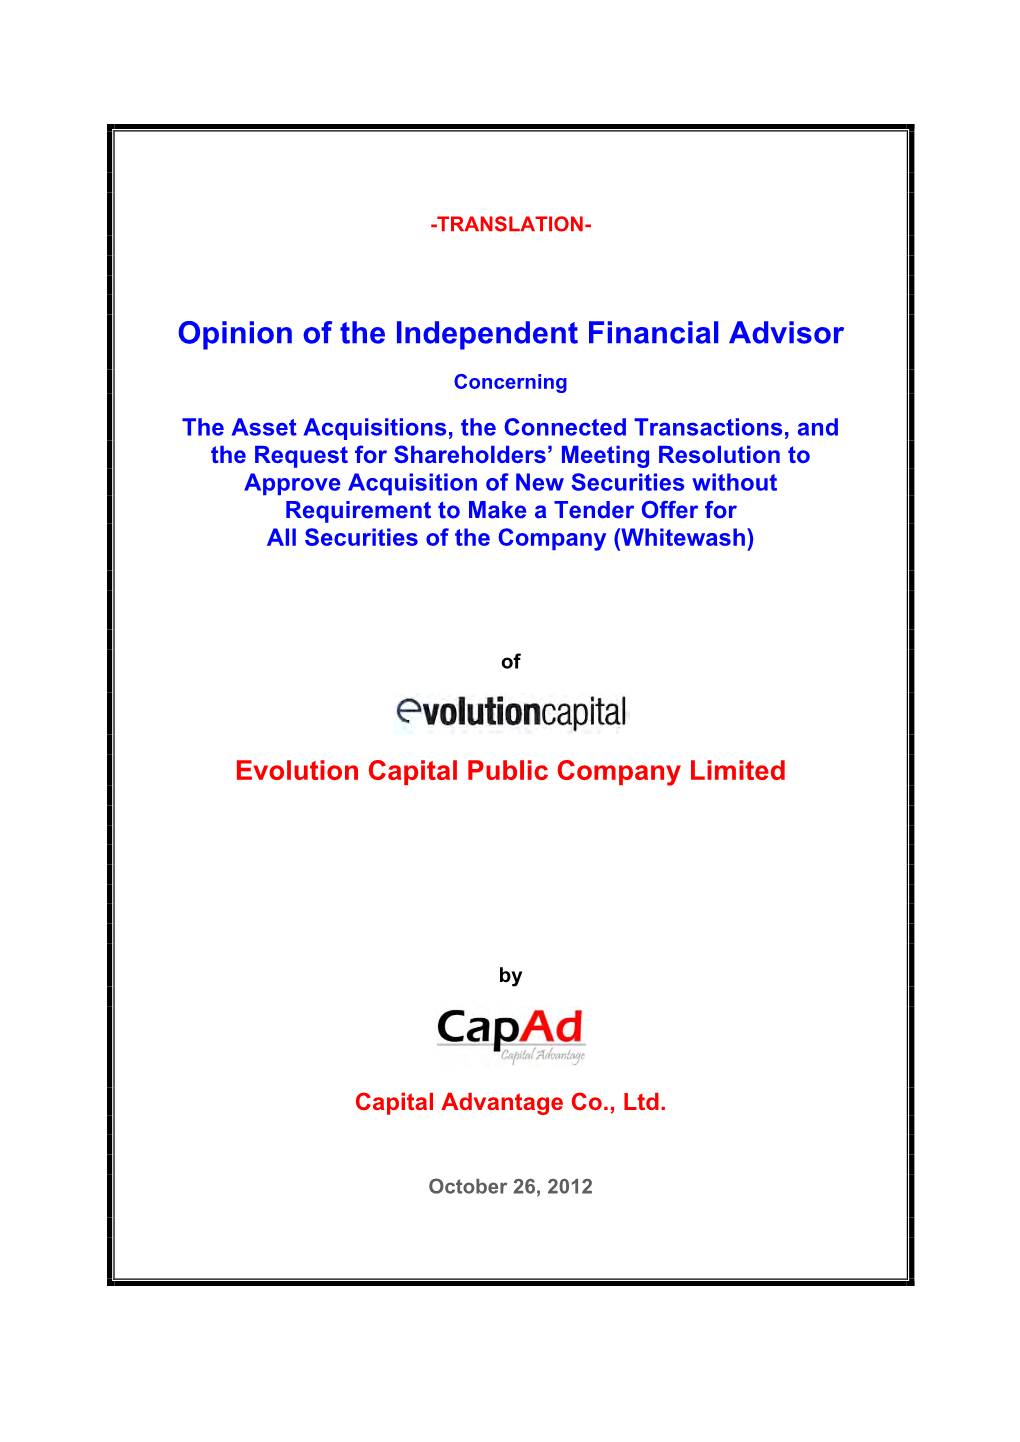 Opinion of the Independent Financial Advisor